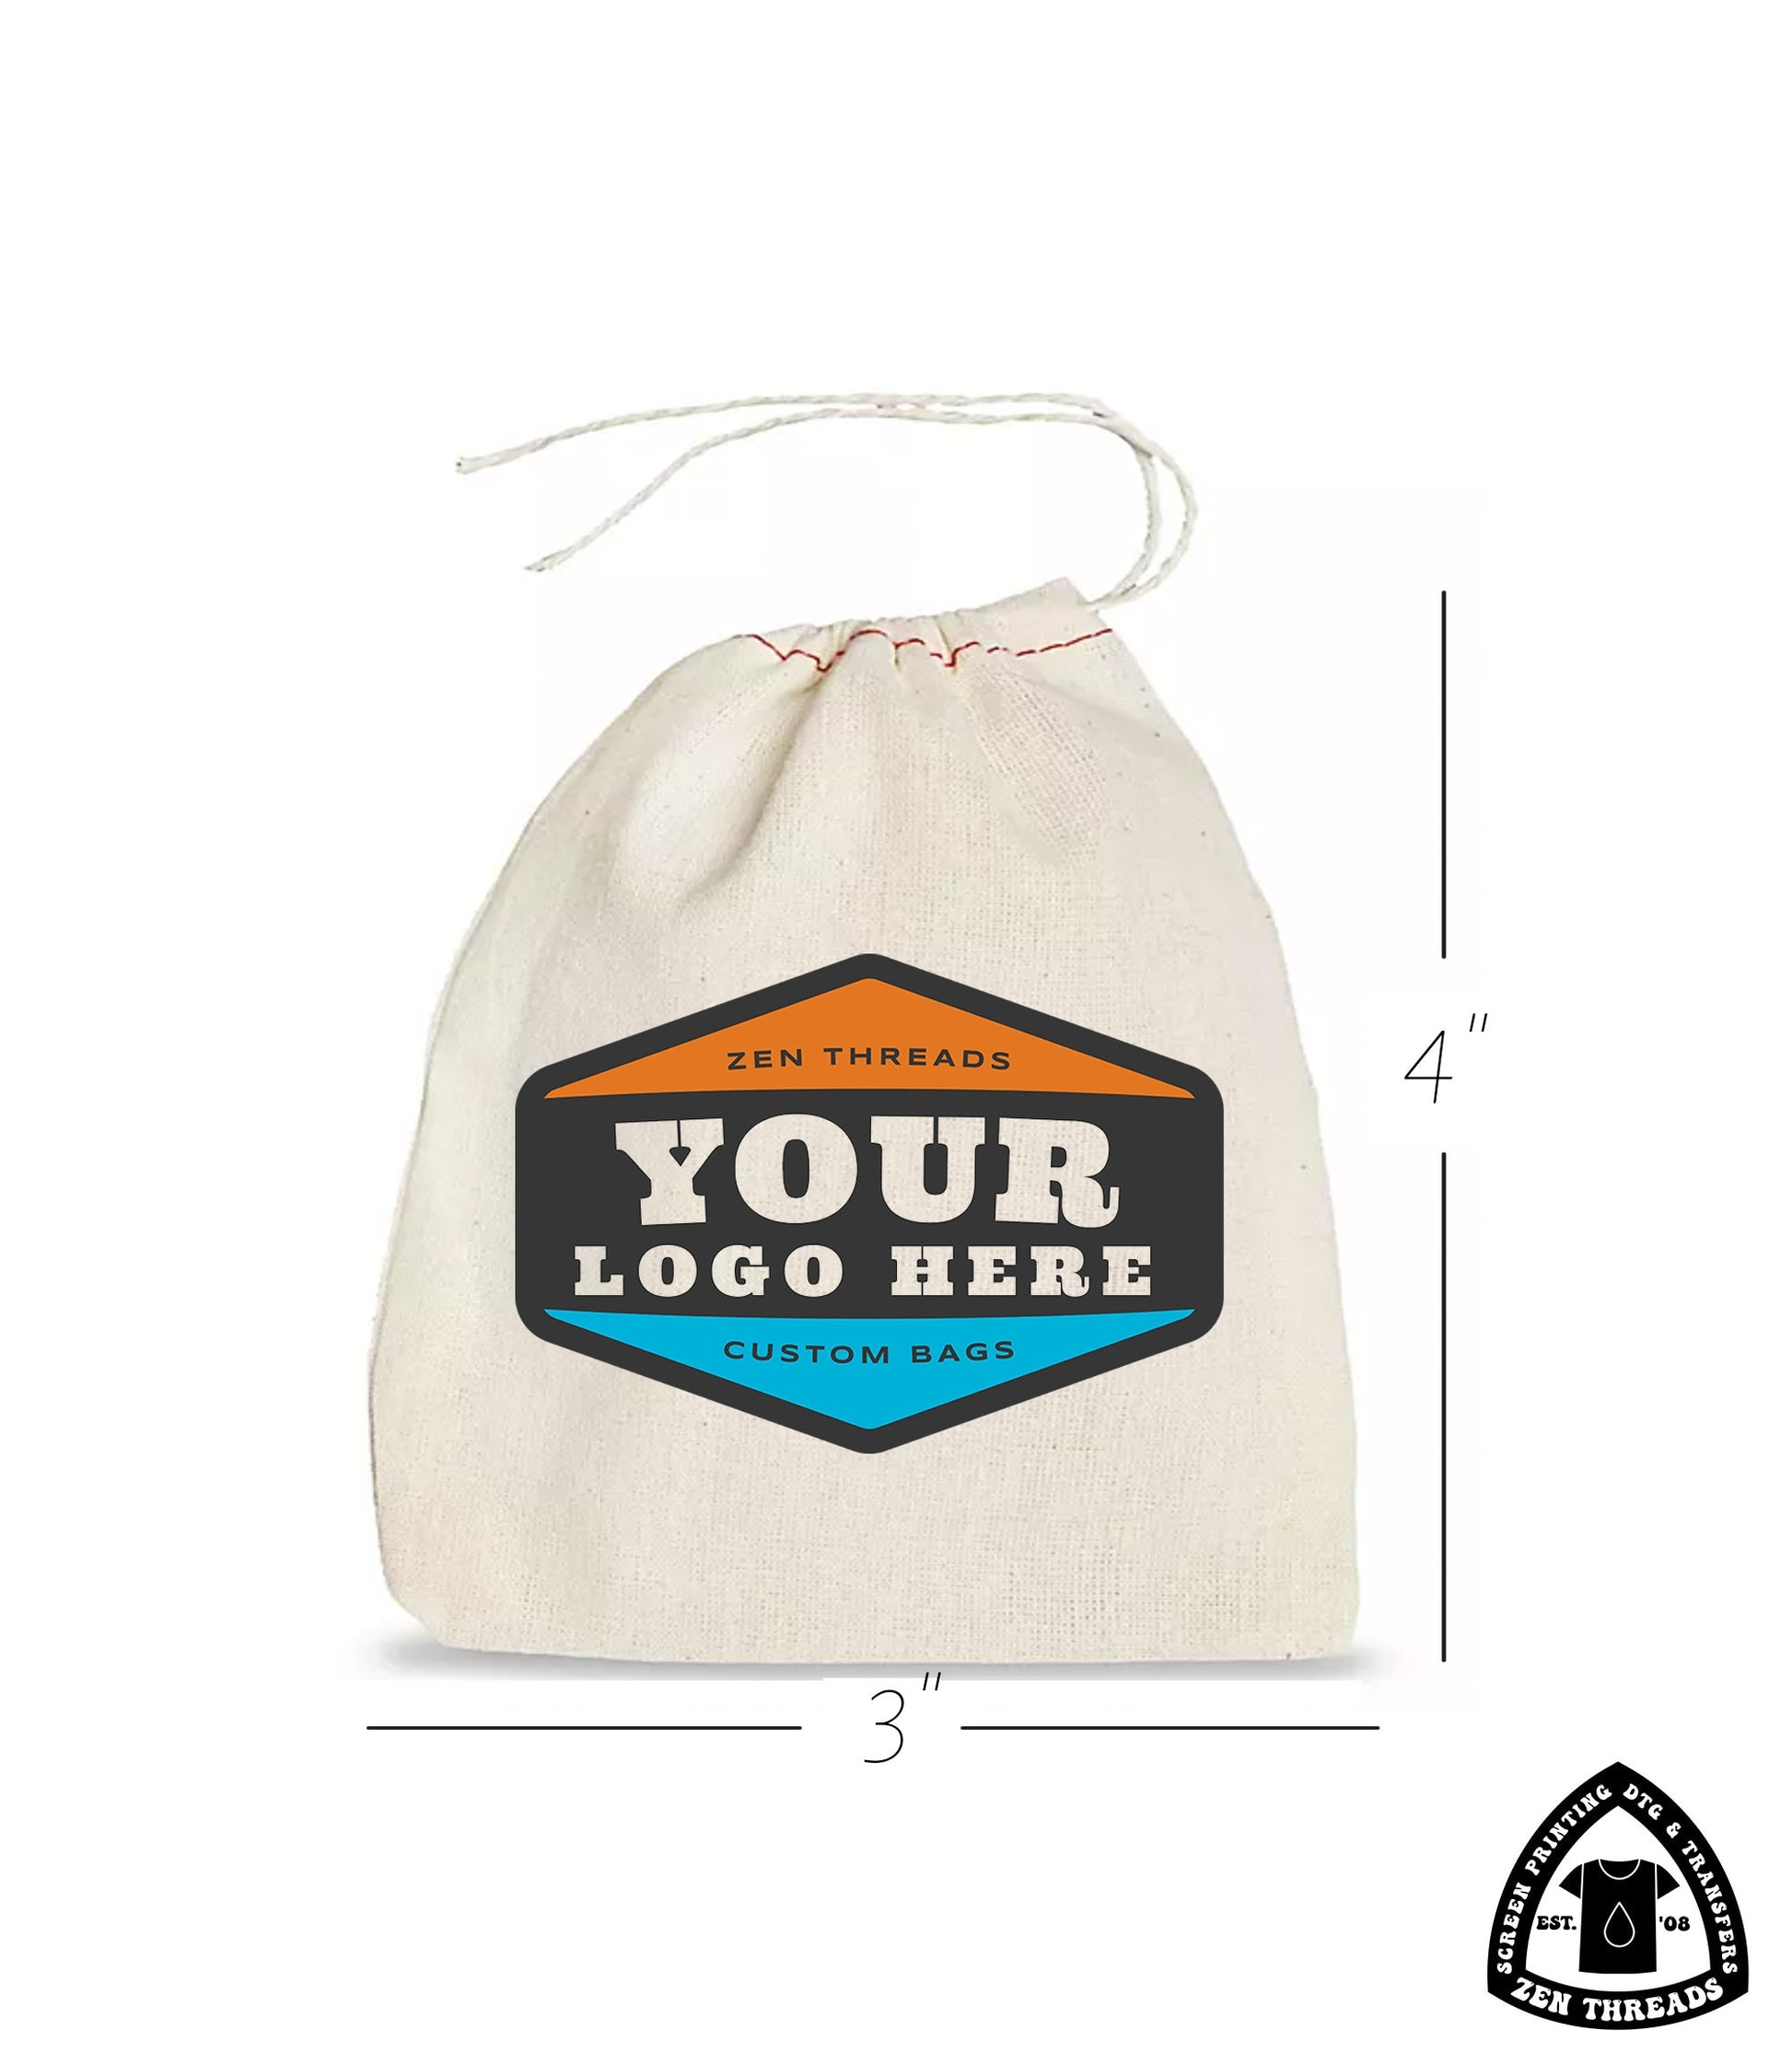 Promotional Products, Custom Imprinted Items With Your Logo